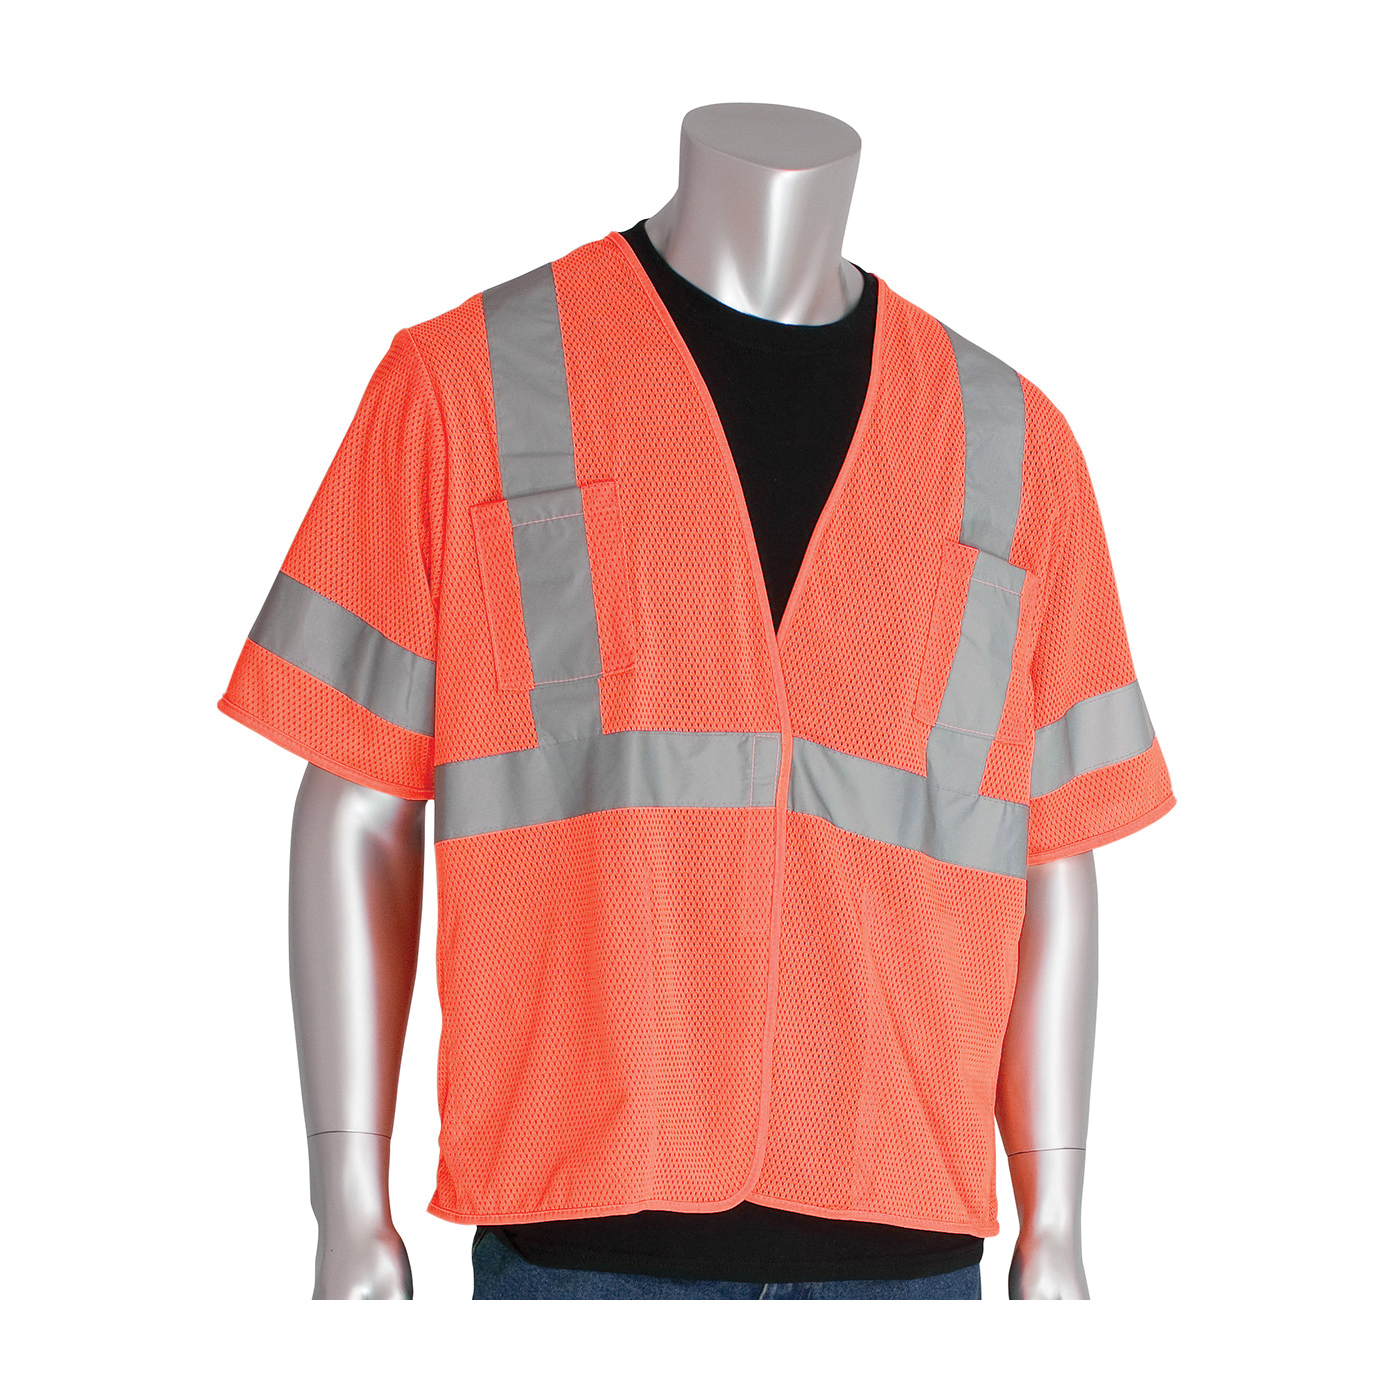 PIP® 303-HSVEOR-L Safety Vest, L, Hi-Viz Orange, Polyester Mesh, Hook and Loop Closure, 4 Pockets, ANSI Class: Class 3, Specifications Met: ANSI 107 Type R